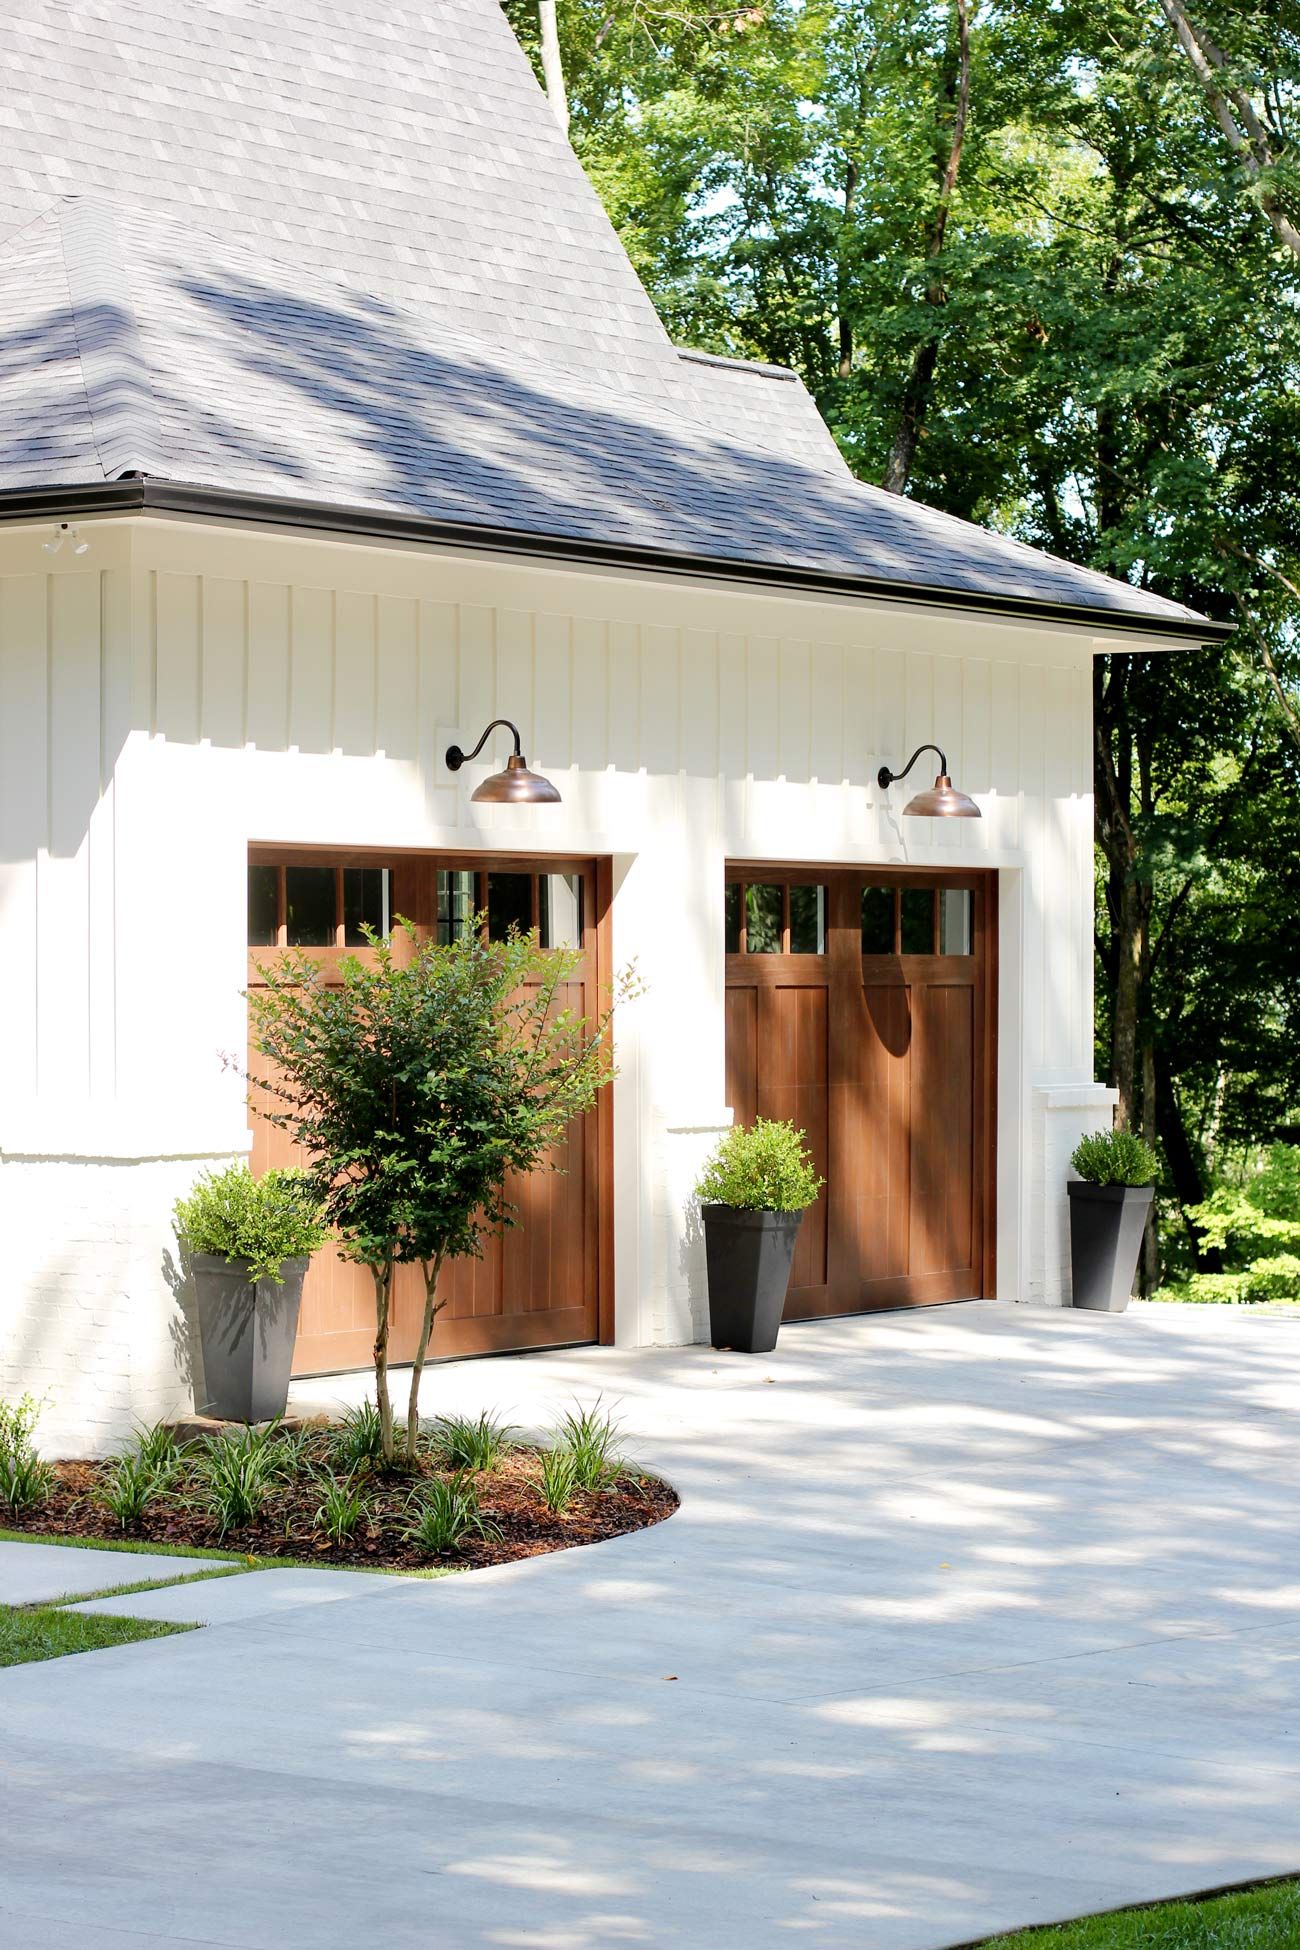 The Durable and Long-Lasting Benefits of Concrete Driveways